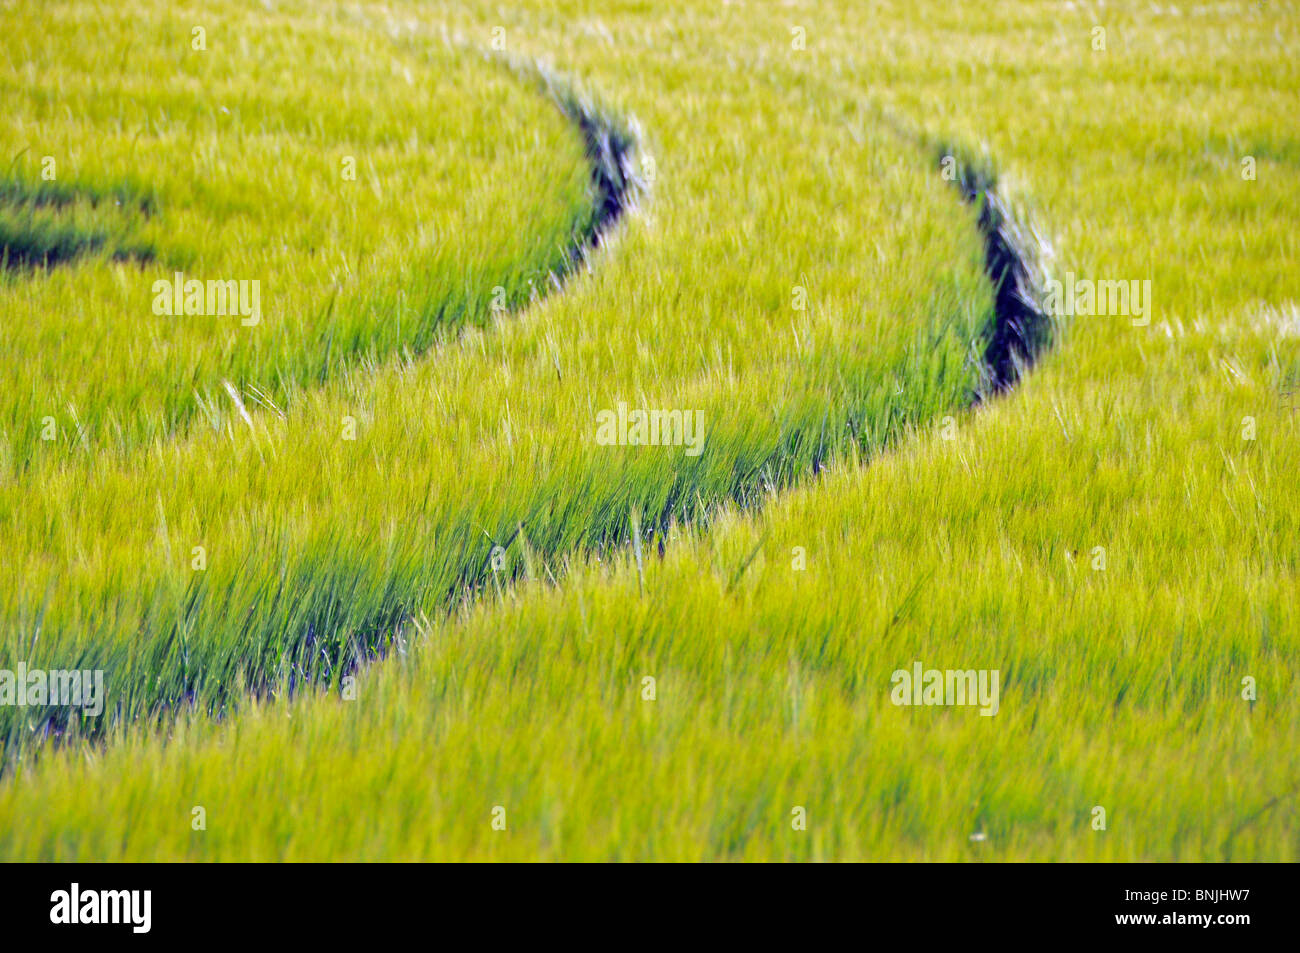 Agriculture ear flower state field barley barley field grain Hordeum vulgare grain field agriculture horizontal format matures Stock Photo